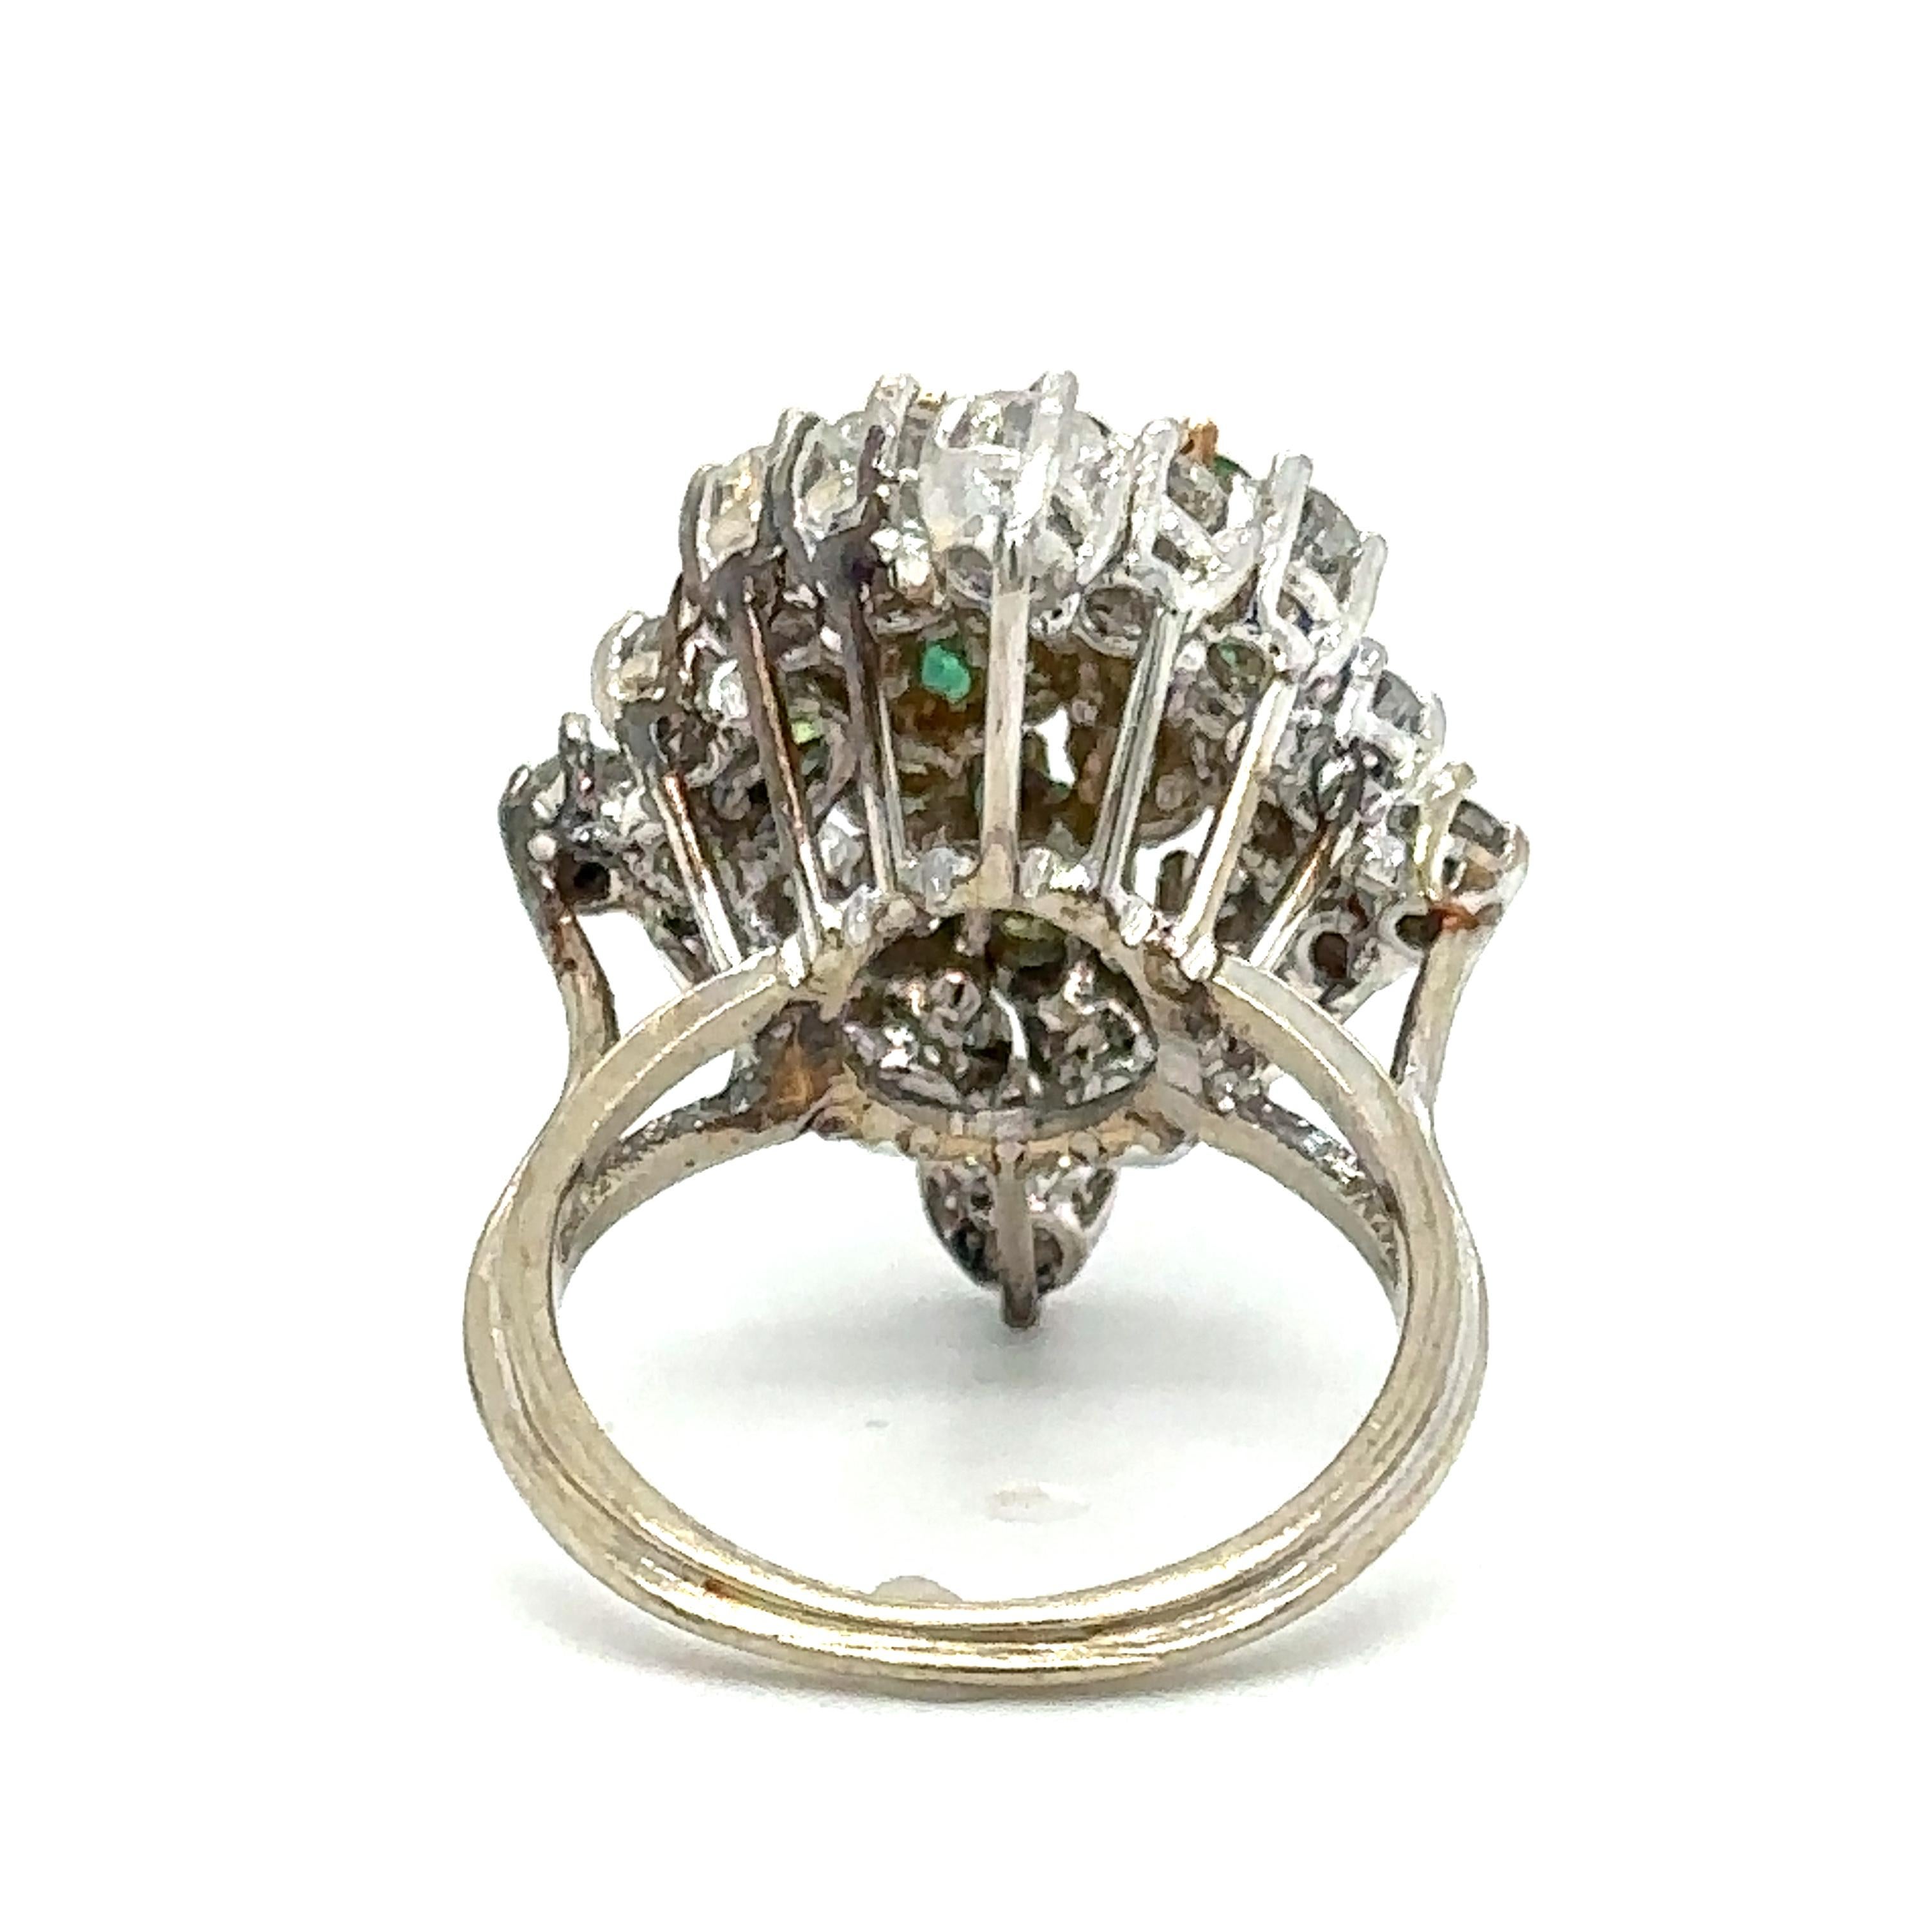 Round Cut Emerald and Diamond Cocktail Ring in 14 Karat White Gold, circa 1950s For Sale